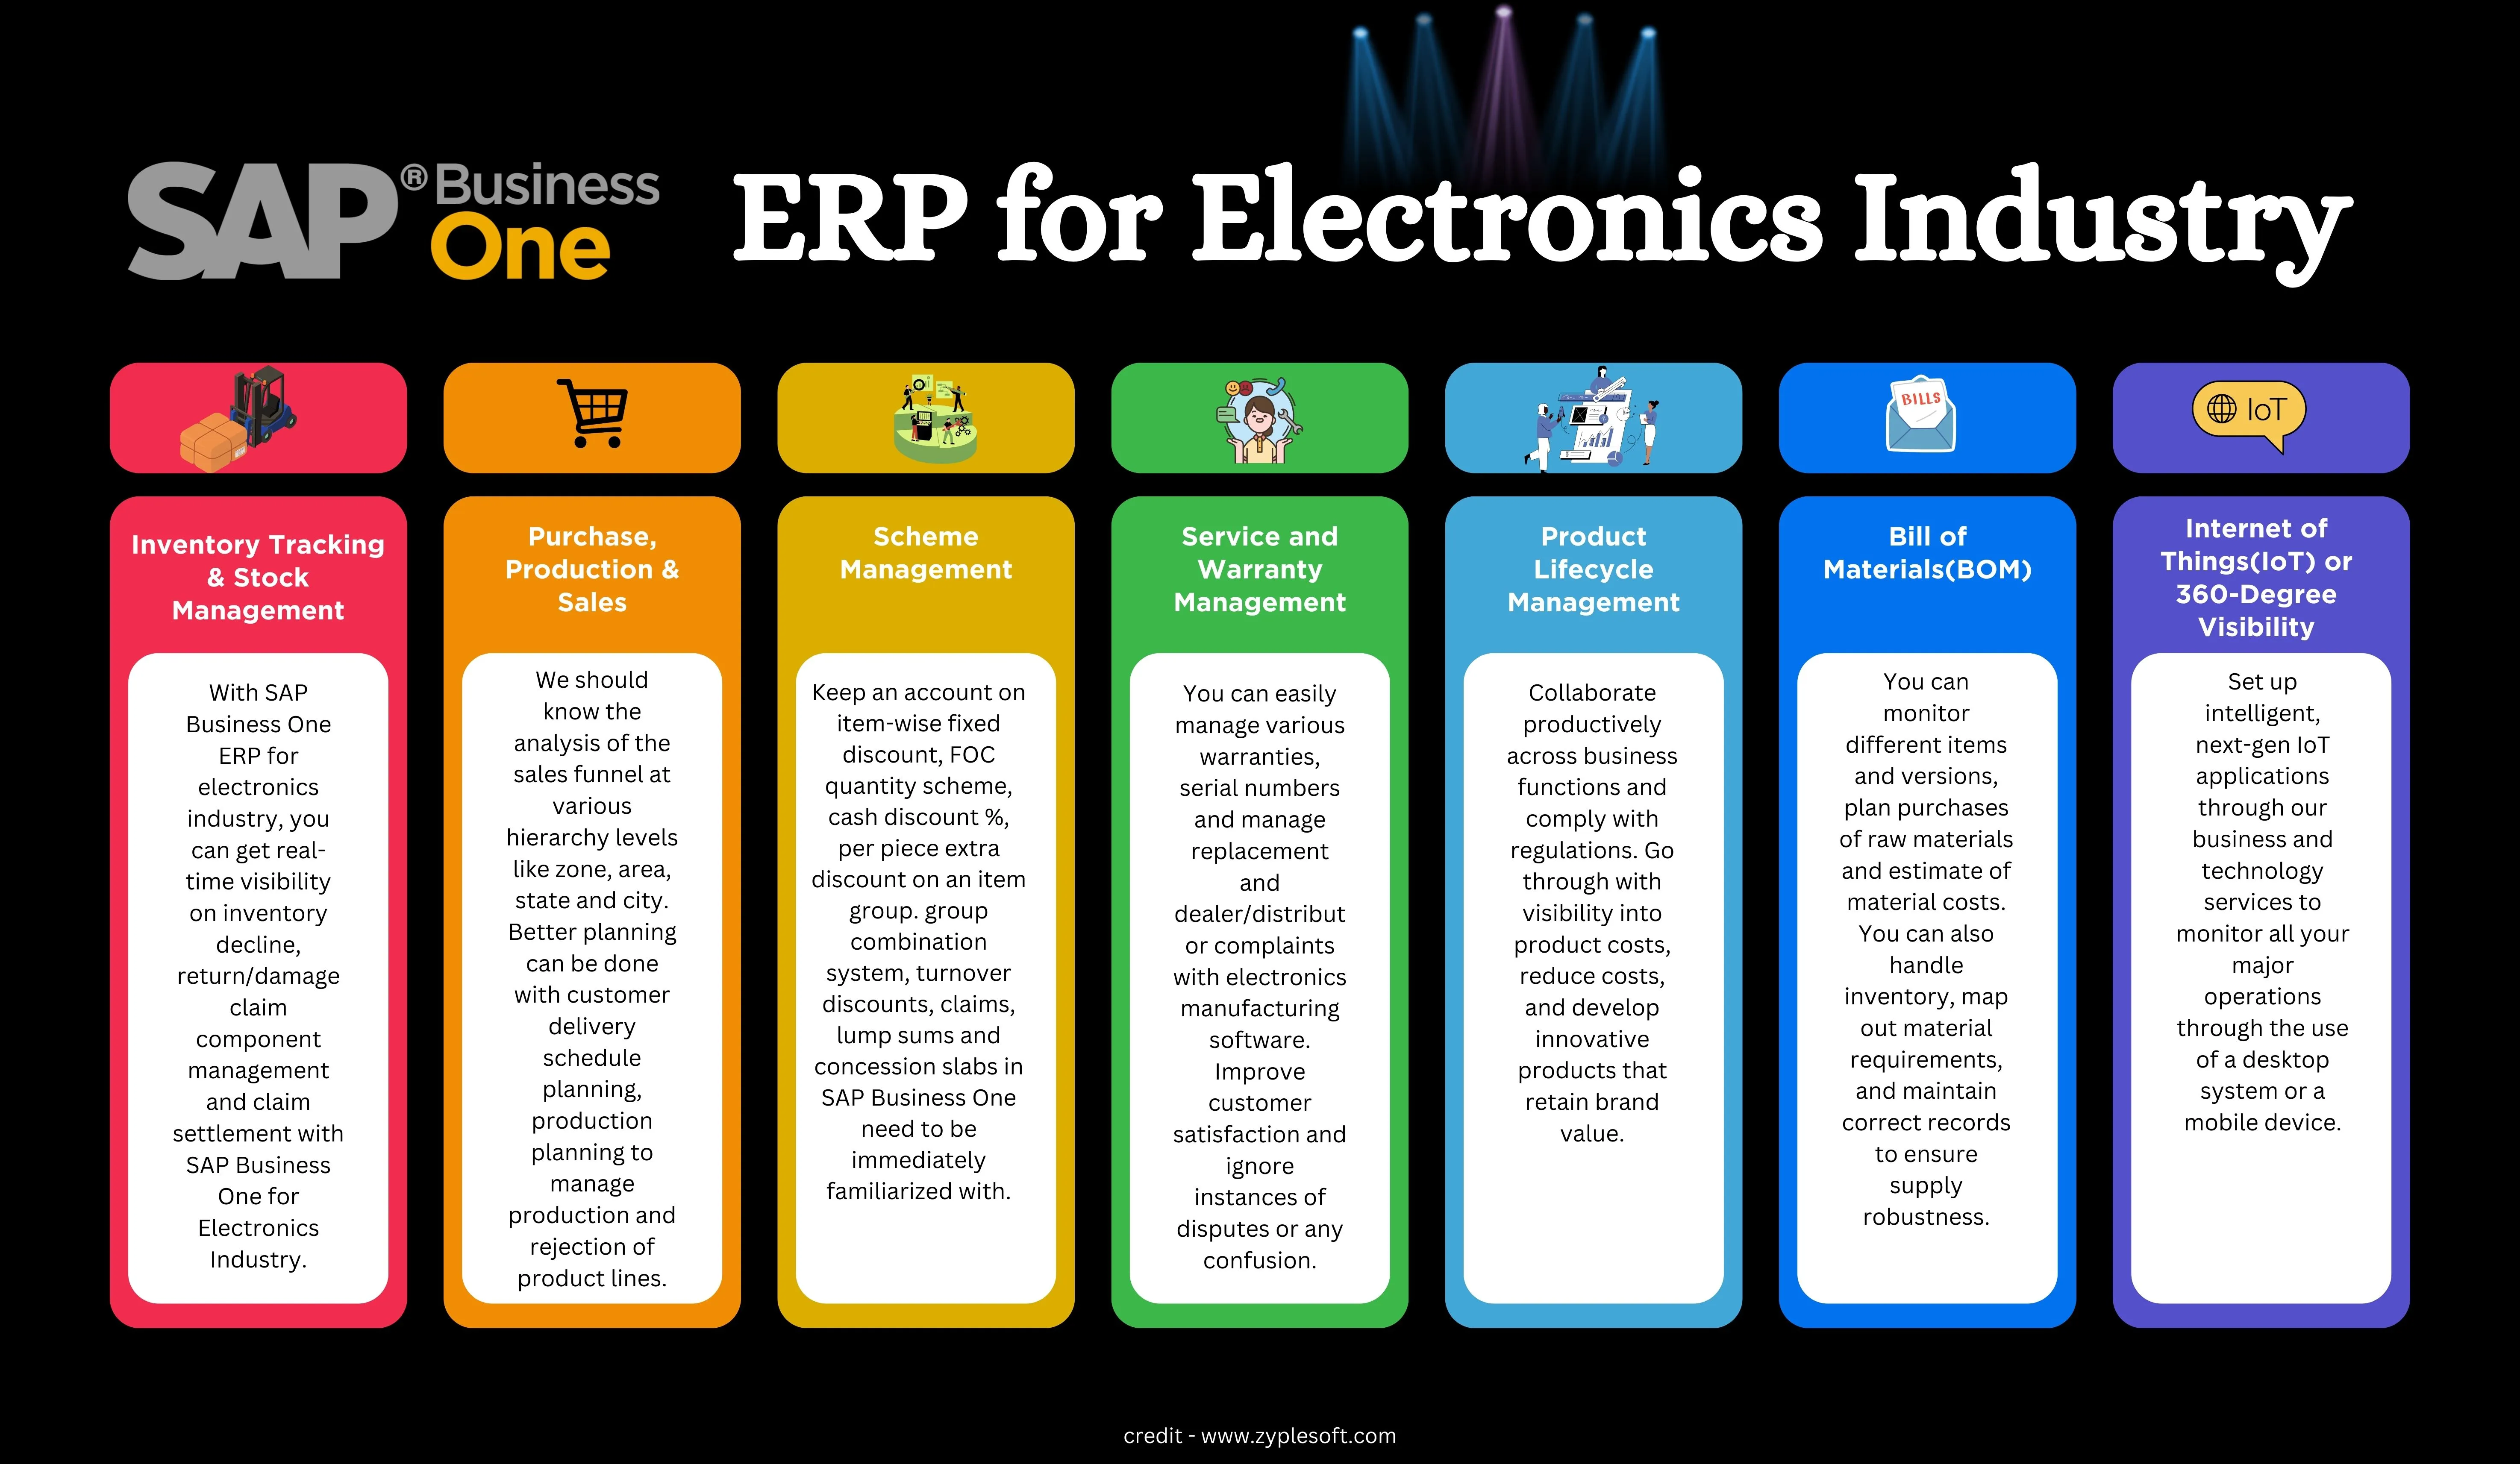 SAP business One ERP for Electronics Industry